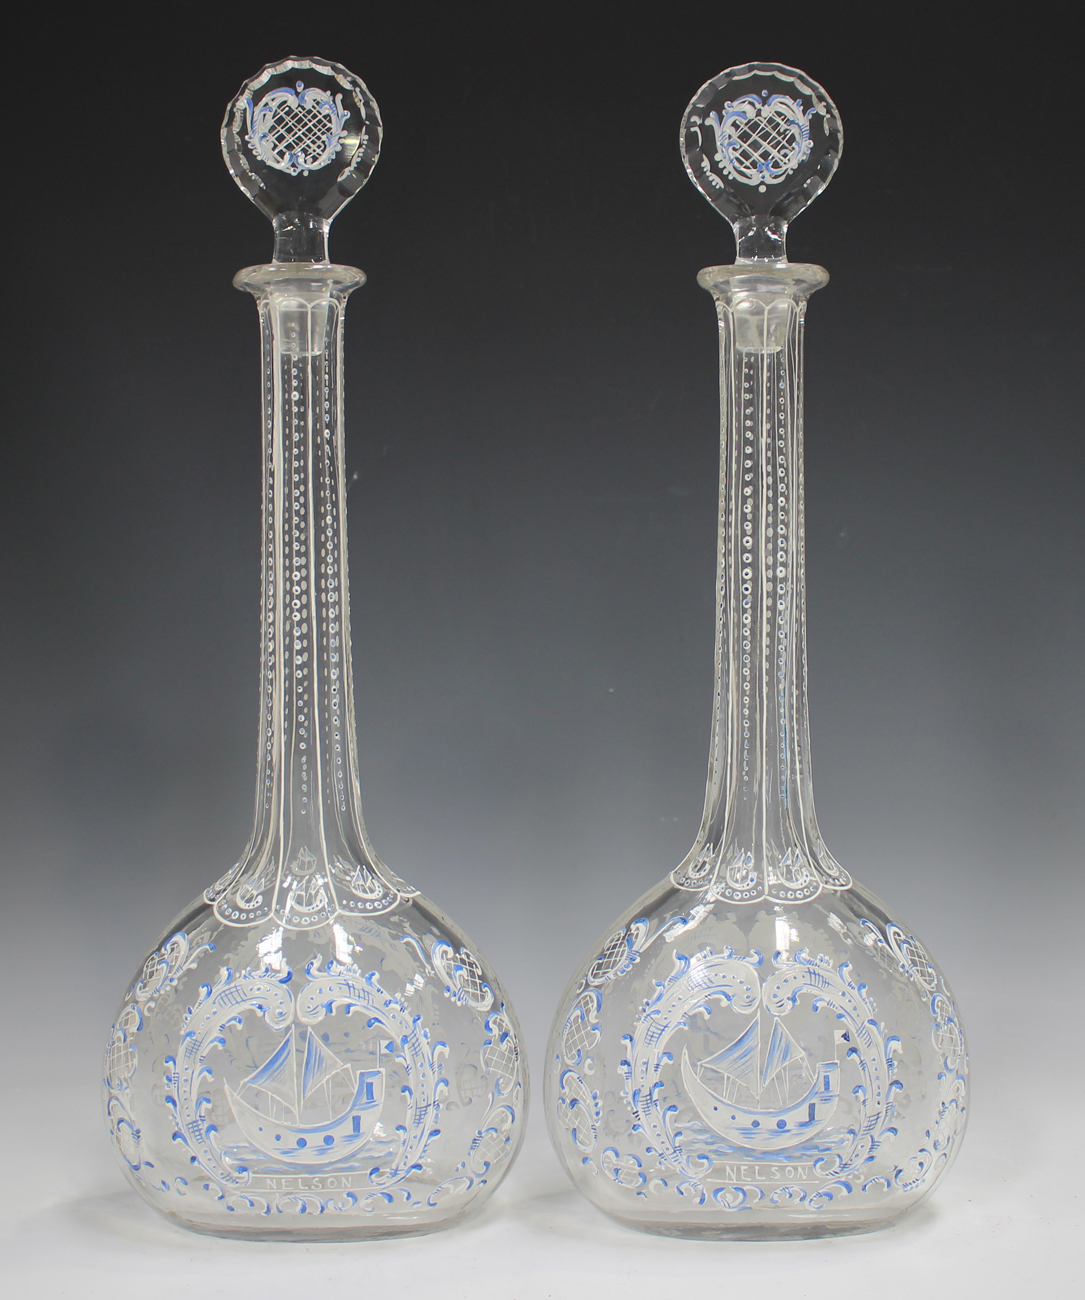 A pair of enamelled glass decanters and stoppers, 19th century, in Beilby style, each flattened - Image 6 of 7